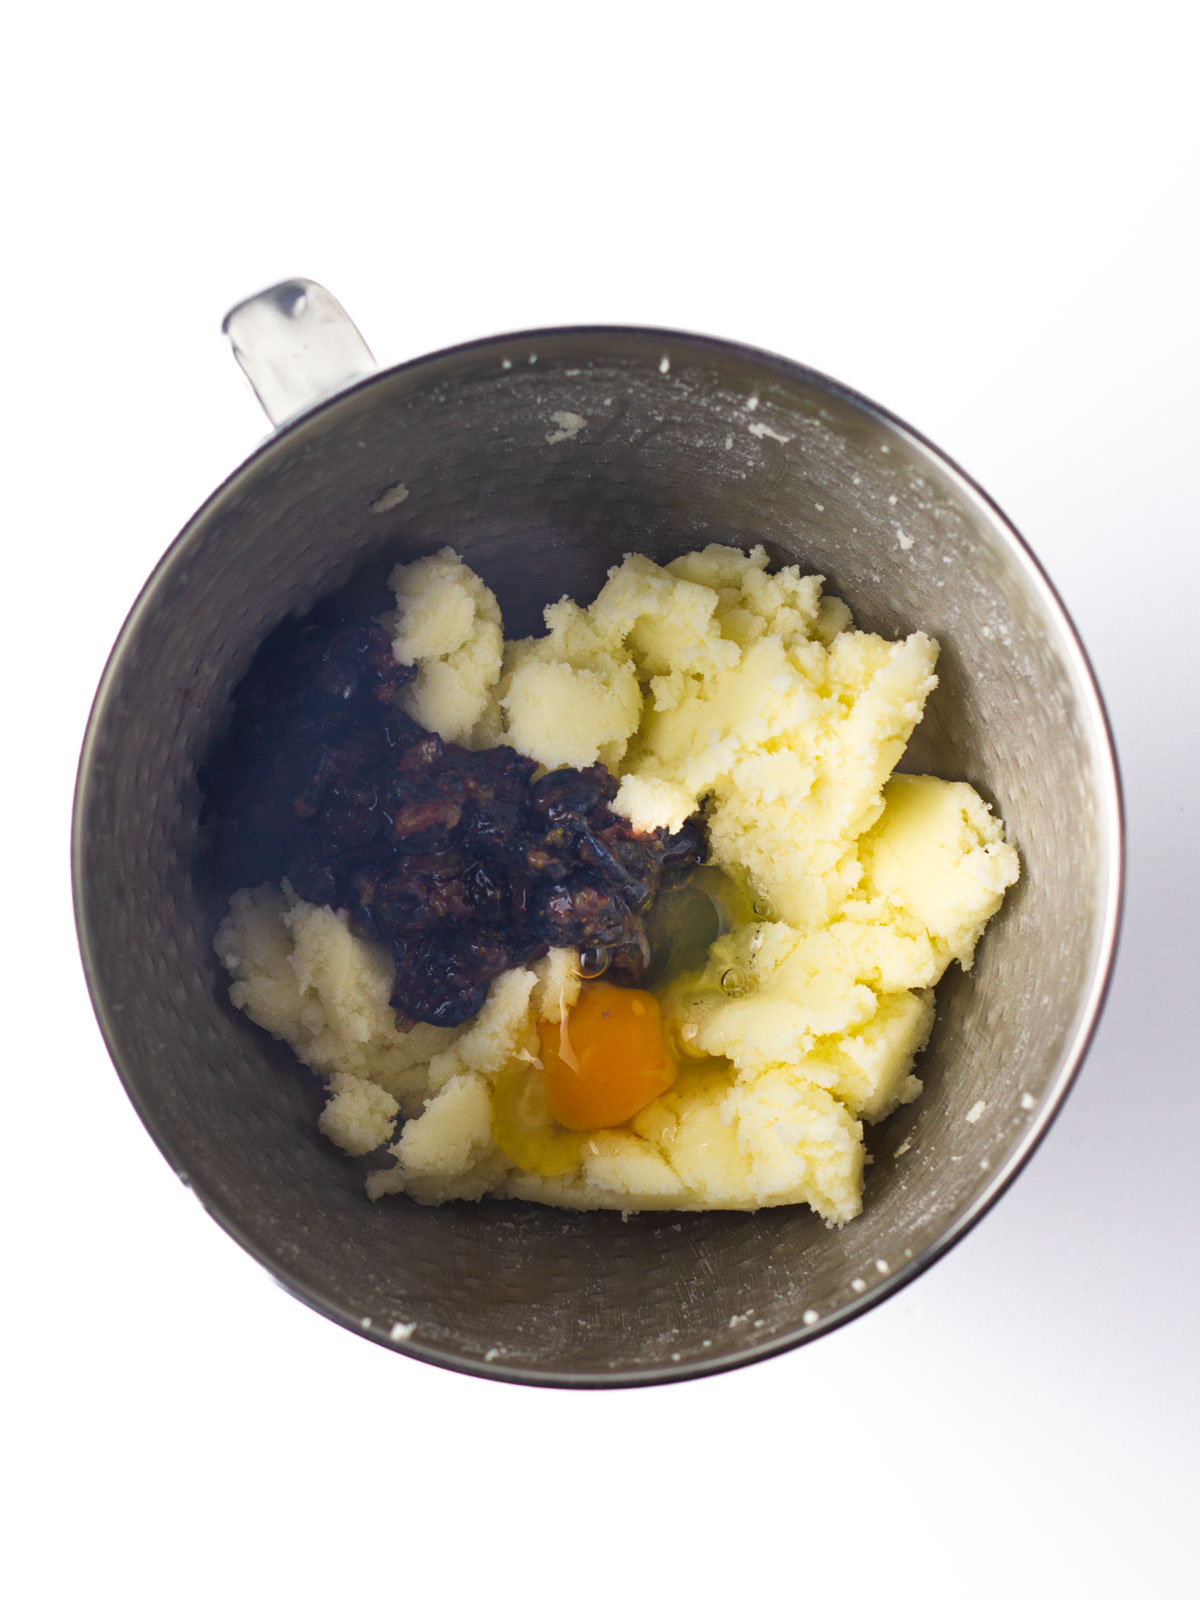 Egg and mashed blueberries added to the creamed butter and sugar in a silver textured mixing bowl.